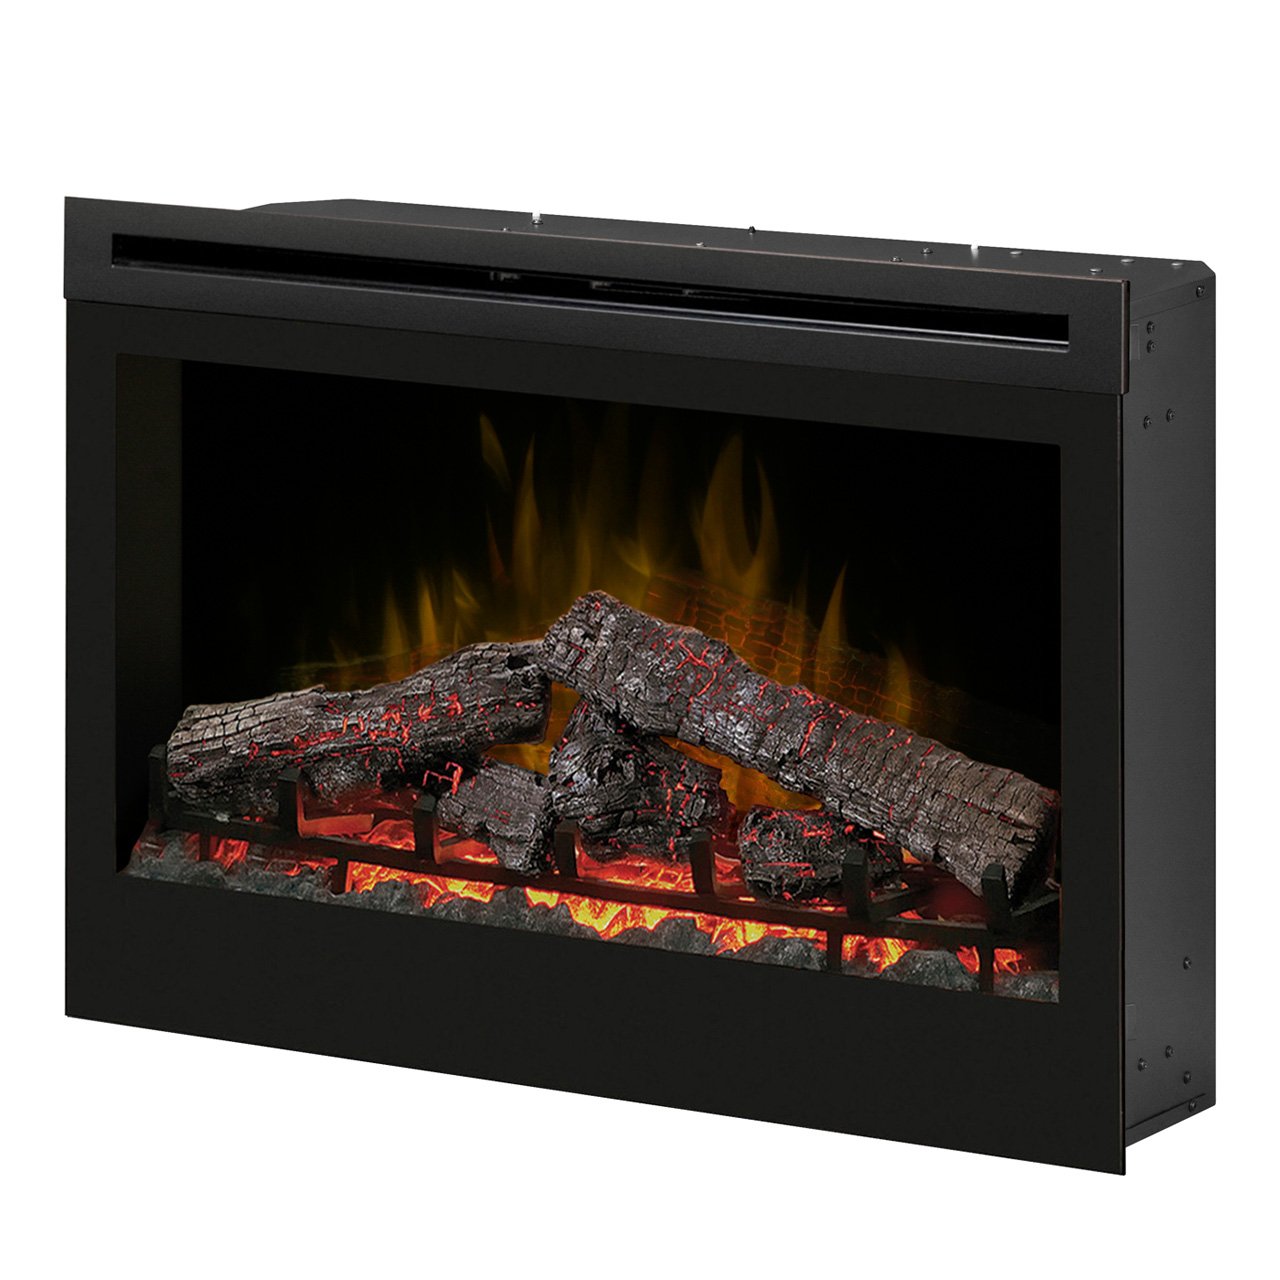 How to Start Electric Fireplace Awesome Dimplex Df3033st 33 Inch Self Trimming Electric Fireplace Insert